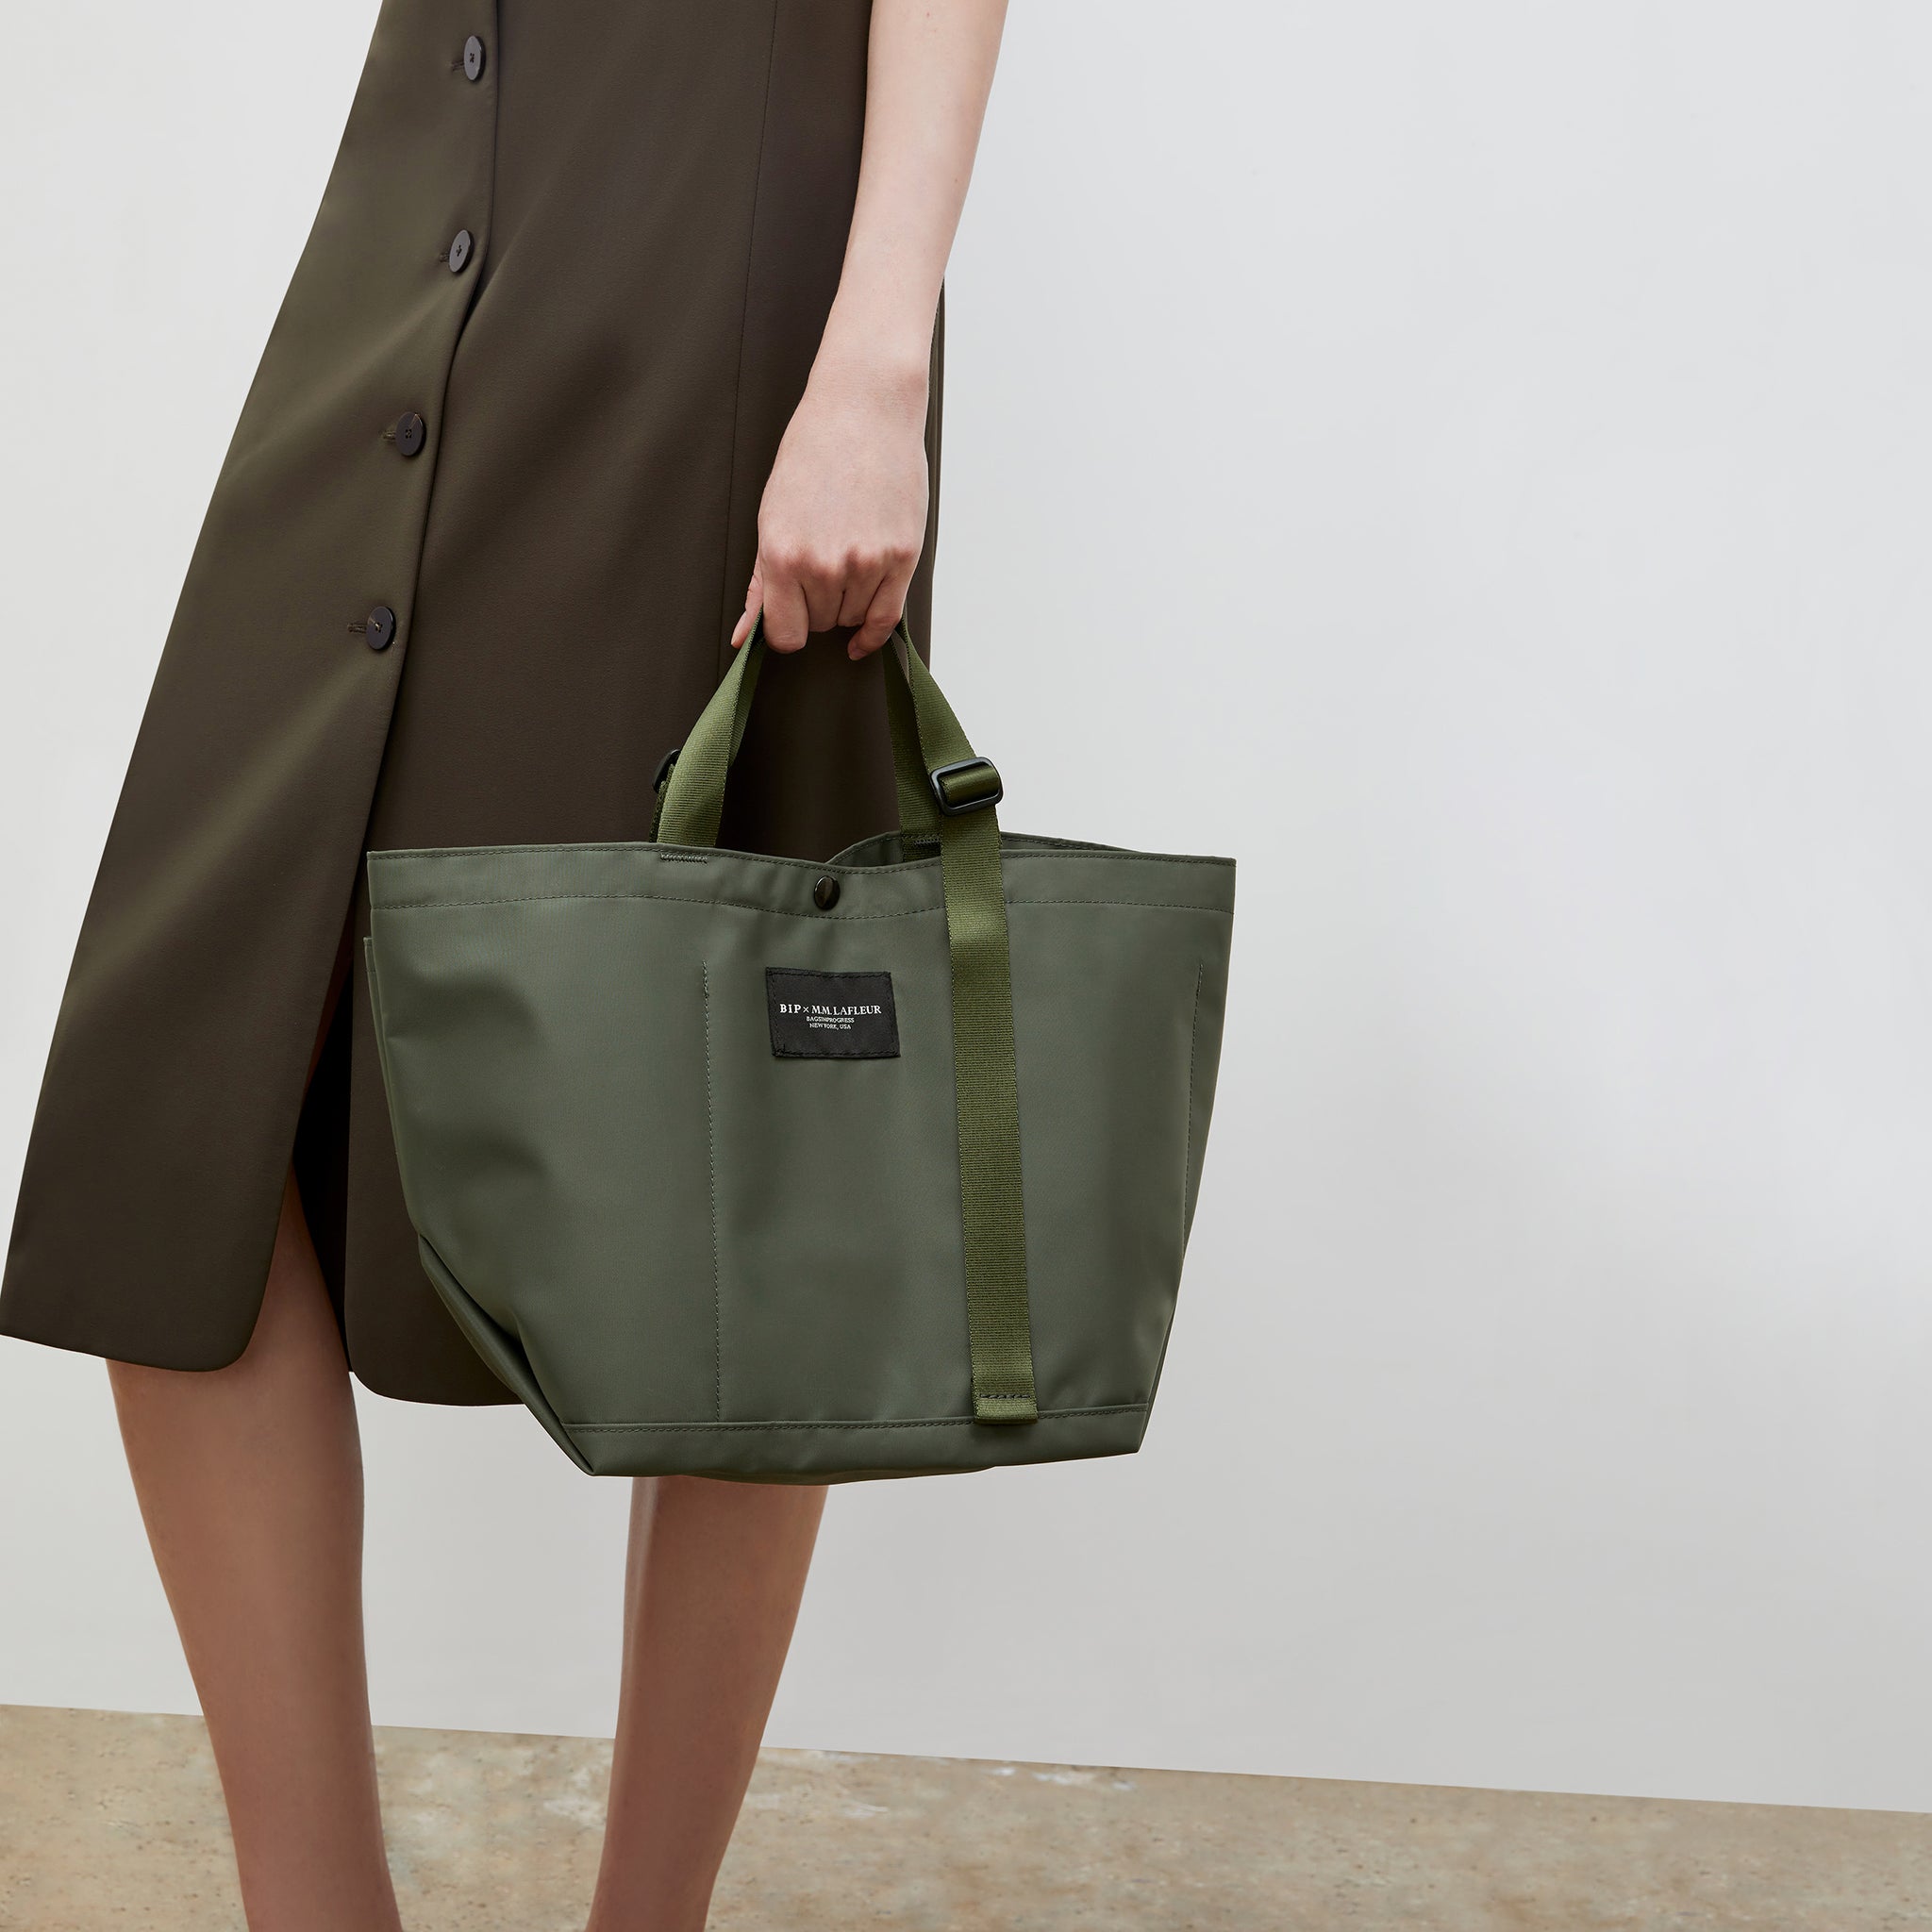 Front image of a woman wearing the Bags in Progress x MM Small Carry All Tote  in Khaki Green